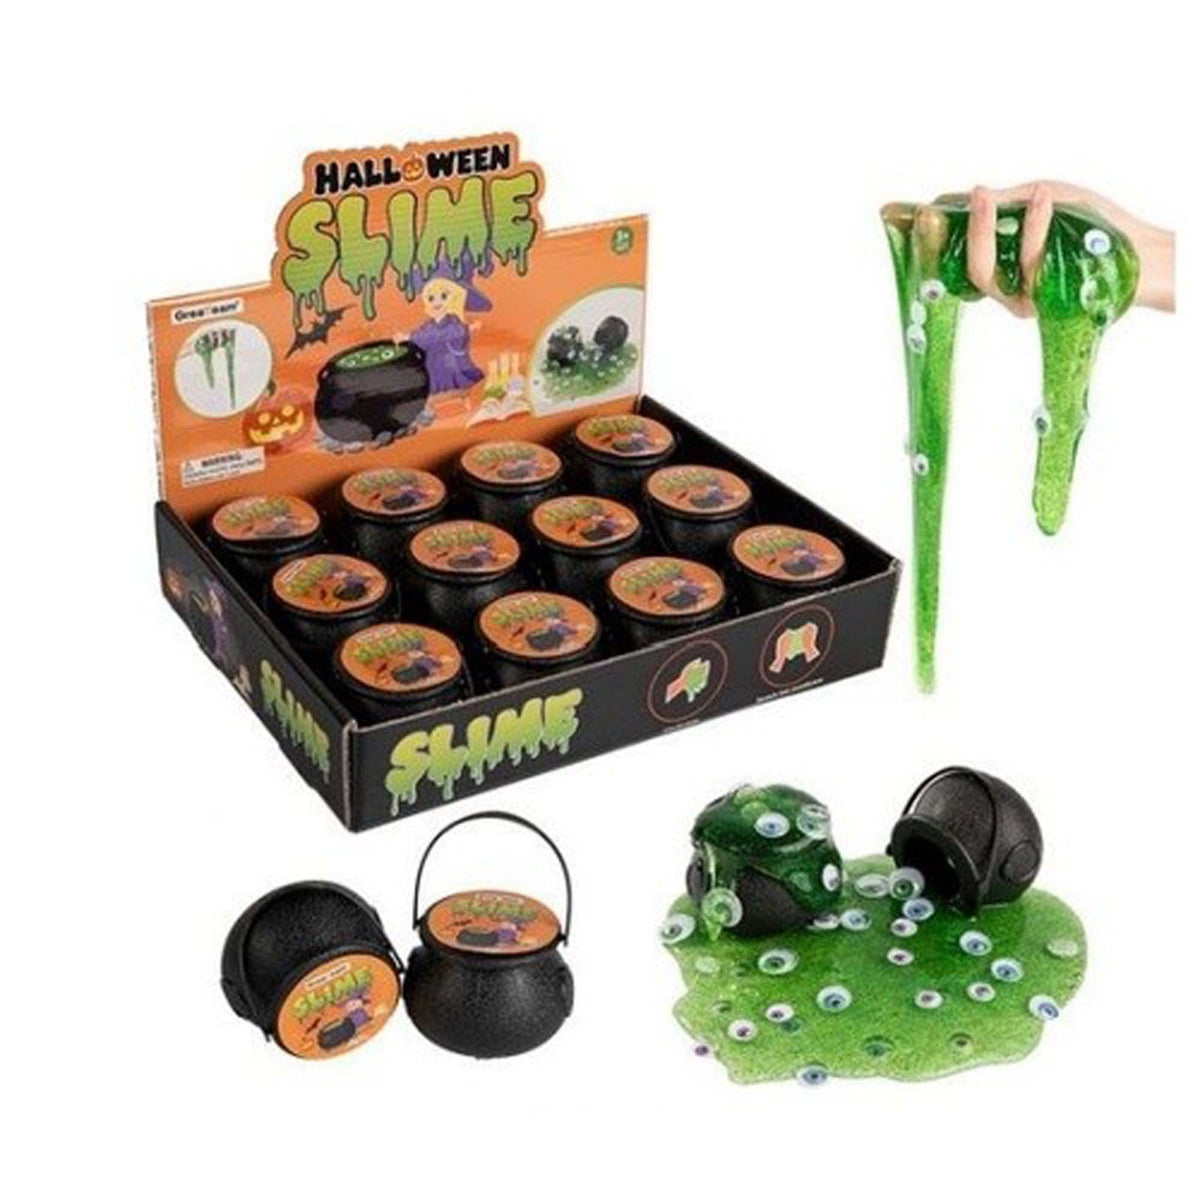 HANDEE PRODUCTS/LES PRODUITS H Christmas Cauldron with Sticky Eyes Slime, 1 count